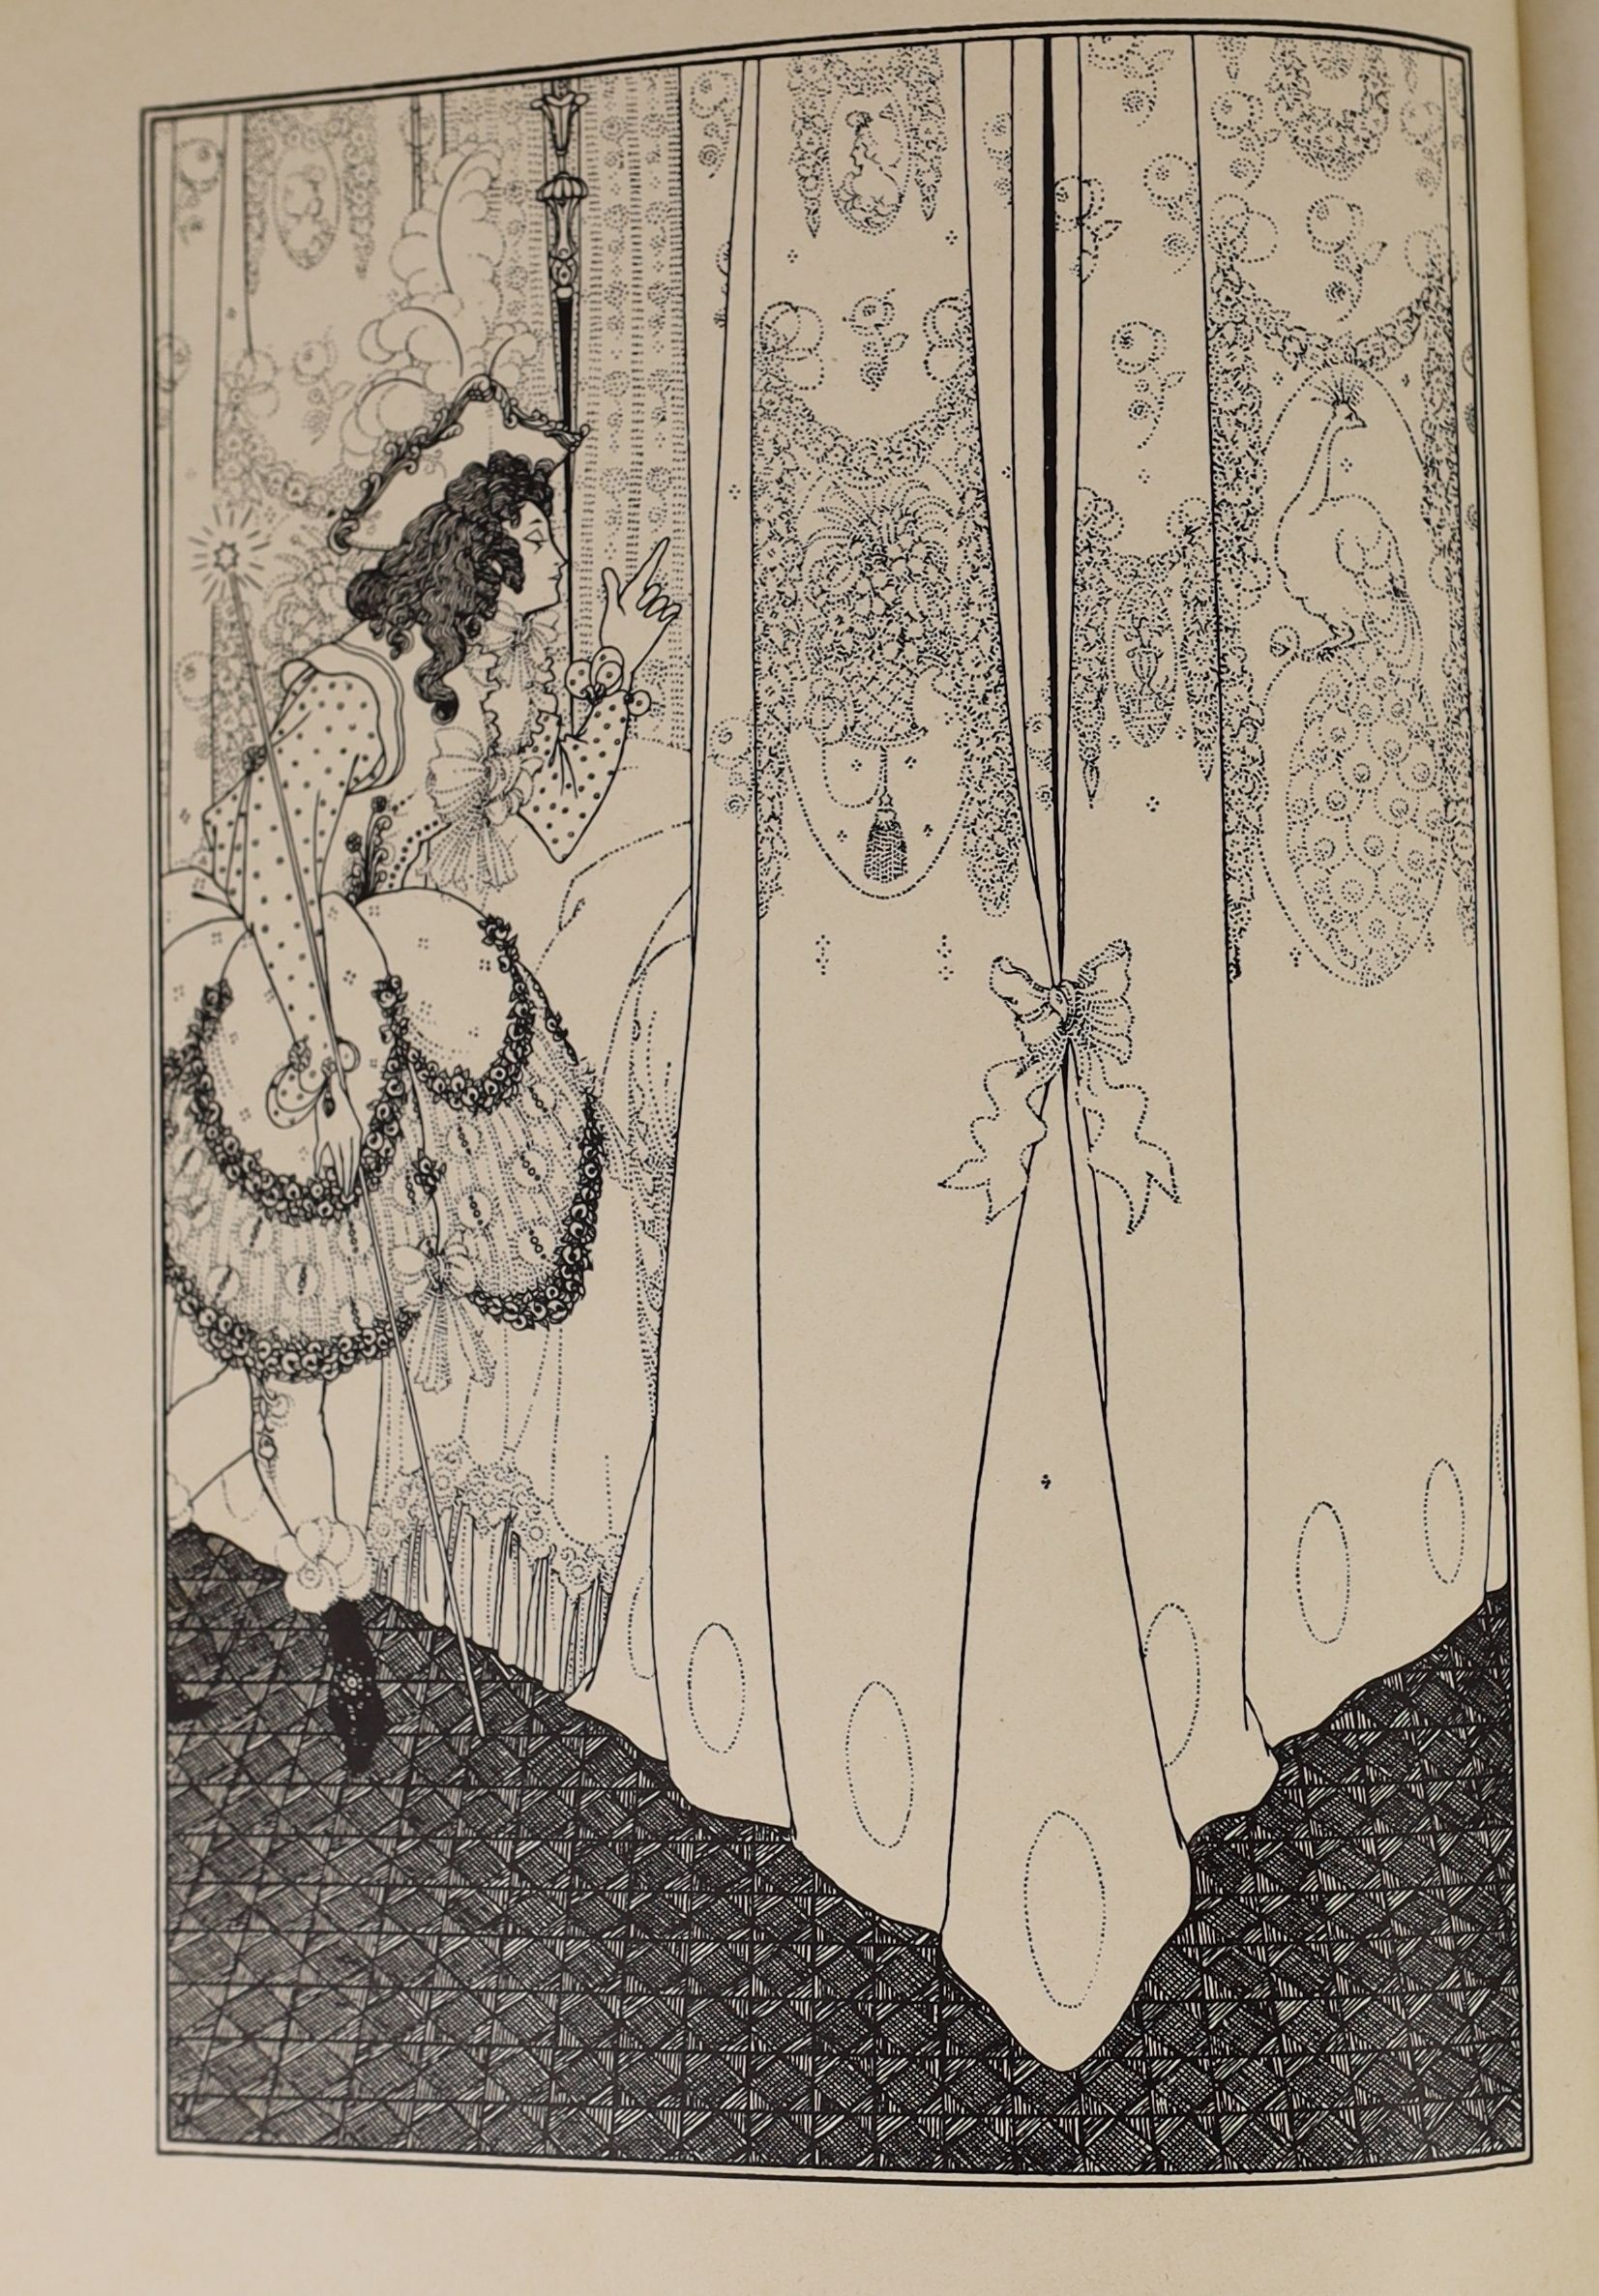 Pope, Alexander - The Rape of the Lock, 1st edition, illustrated with frontis and 6 plates by Aubrey Beardsley, 4to, gilt blocked blue cloth to a Beardsley design, Leonard Smithers, London, 1896